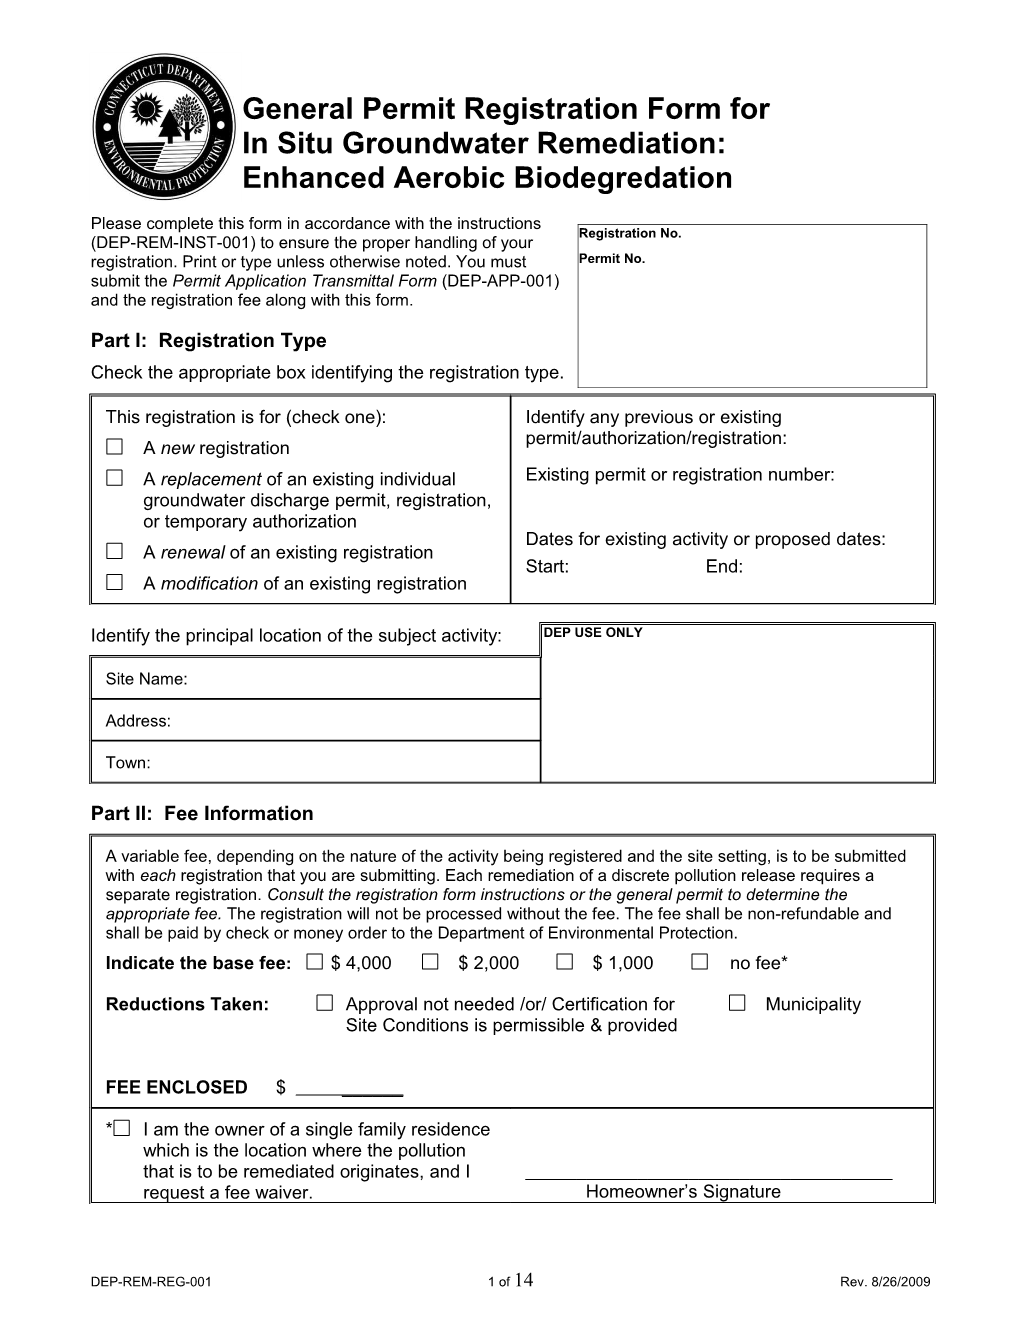 General Permit Registration Form for in Situ Groundwater Remediation: Enhanced Aerobic